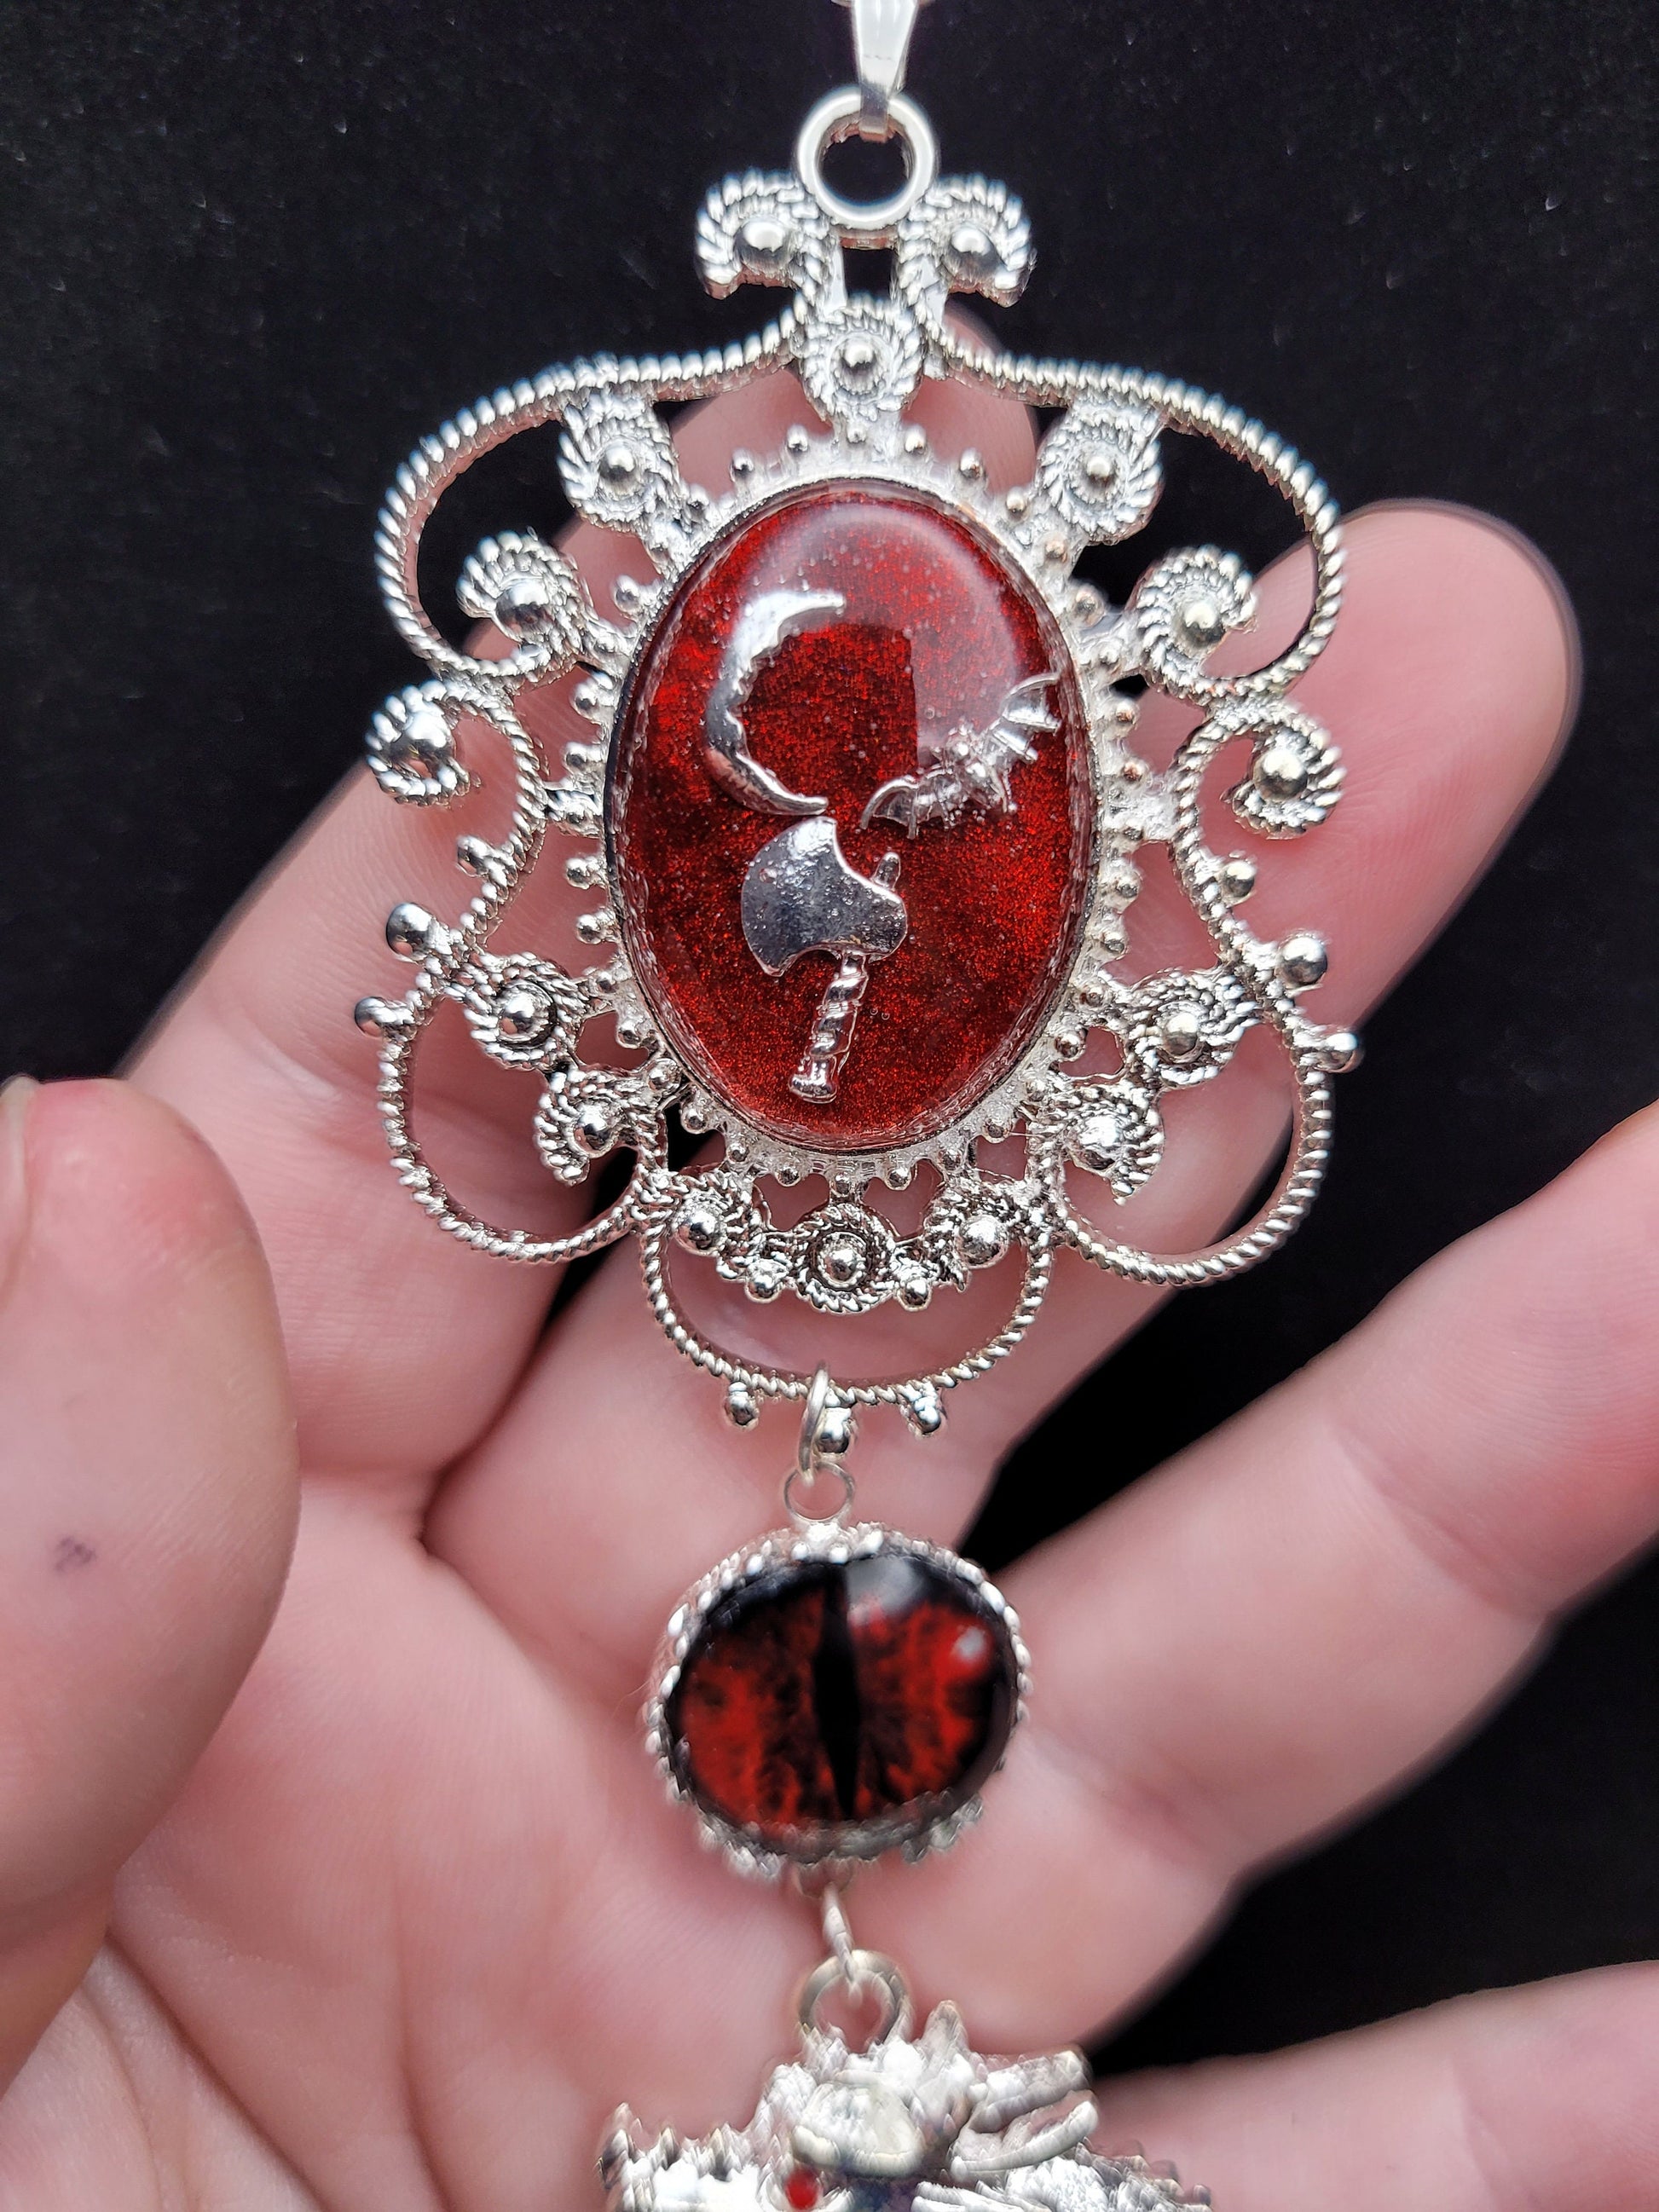 The Warrior: Red and Silver RPG Fantasy Dragon Necklace with Dragon Eye, Hand Axe, Moon, and Bat